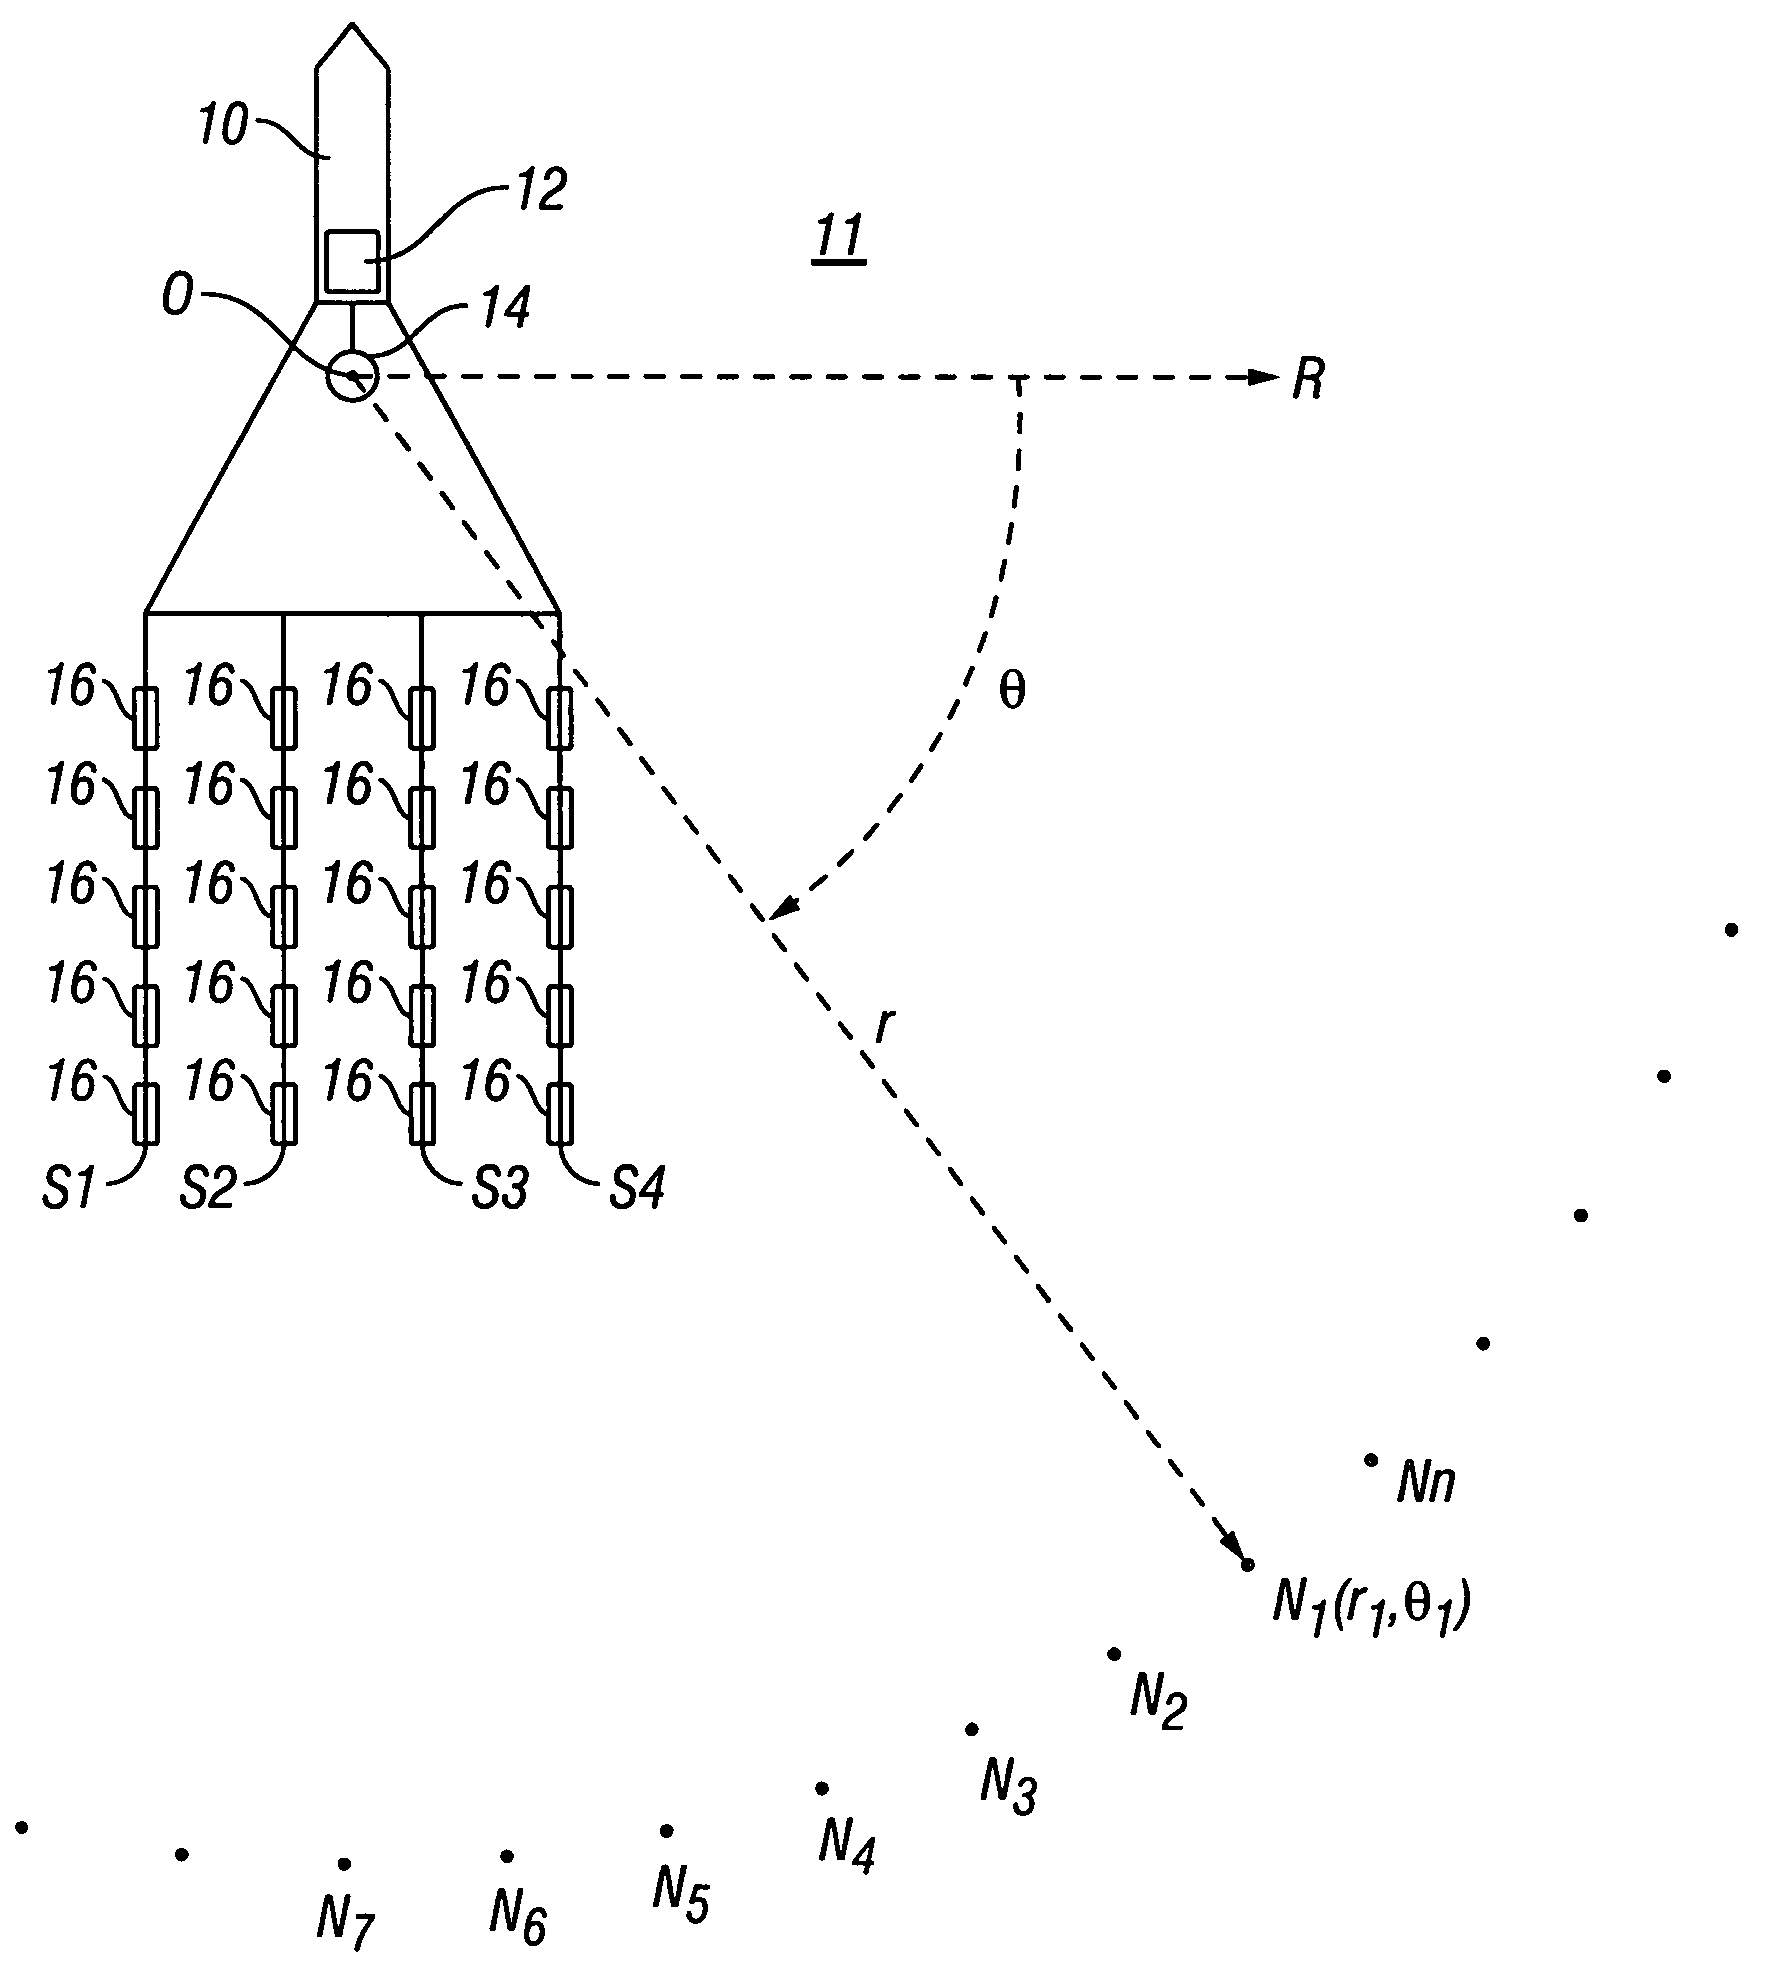 Method for noise suppression in seismic signals using spatial transforms